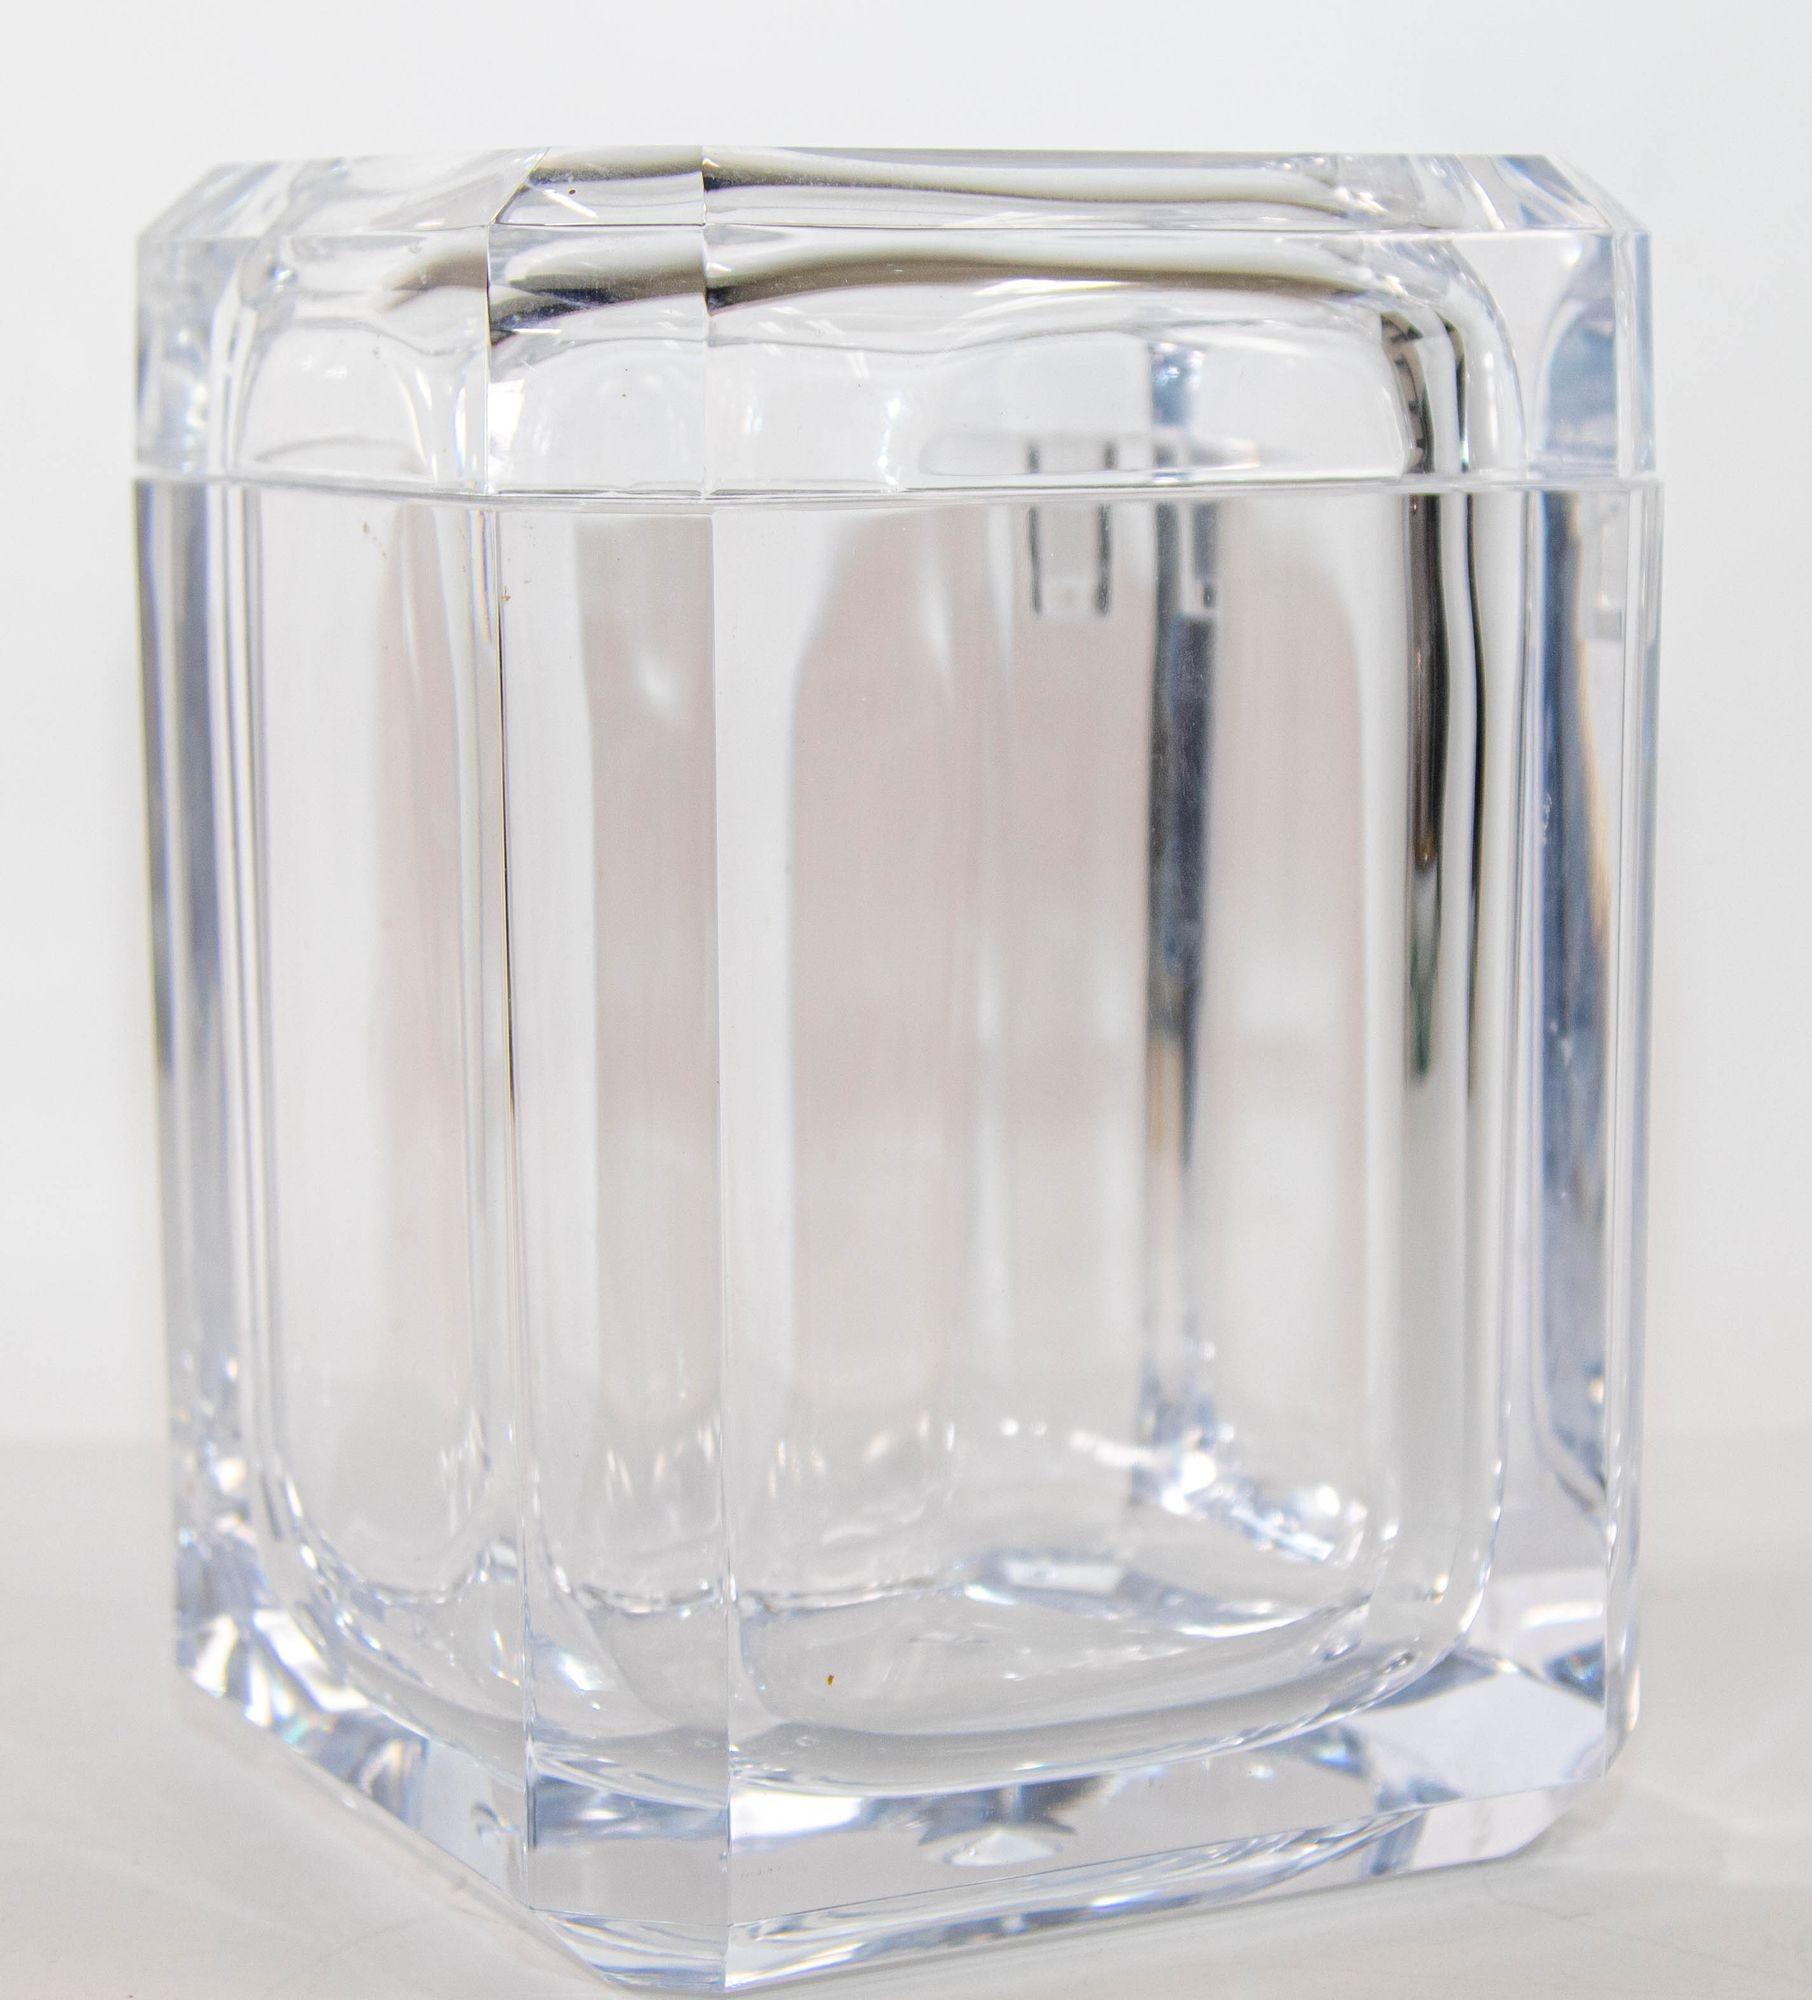 Italian Vintage Mid-Century Modern Alessandro Albrizzi Style Lucite Faceted Ice Bucket For Sale